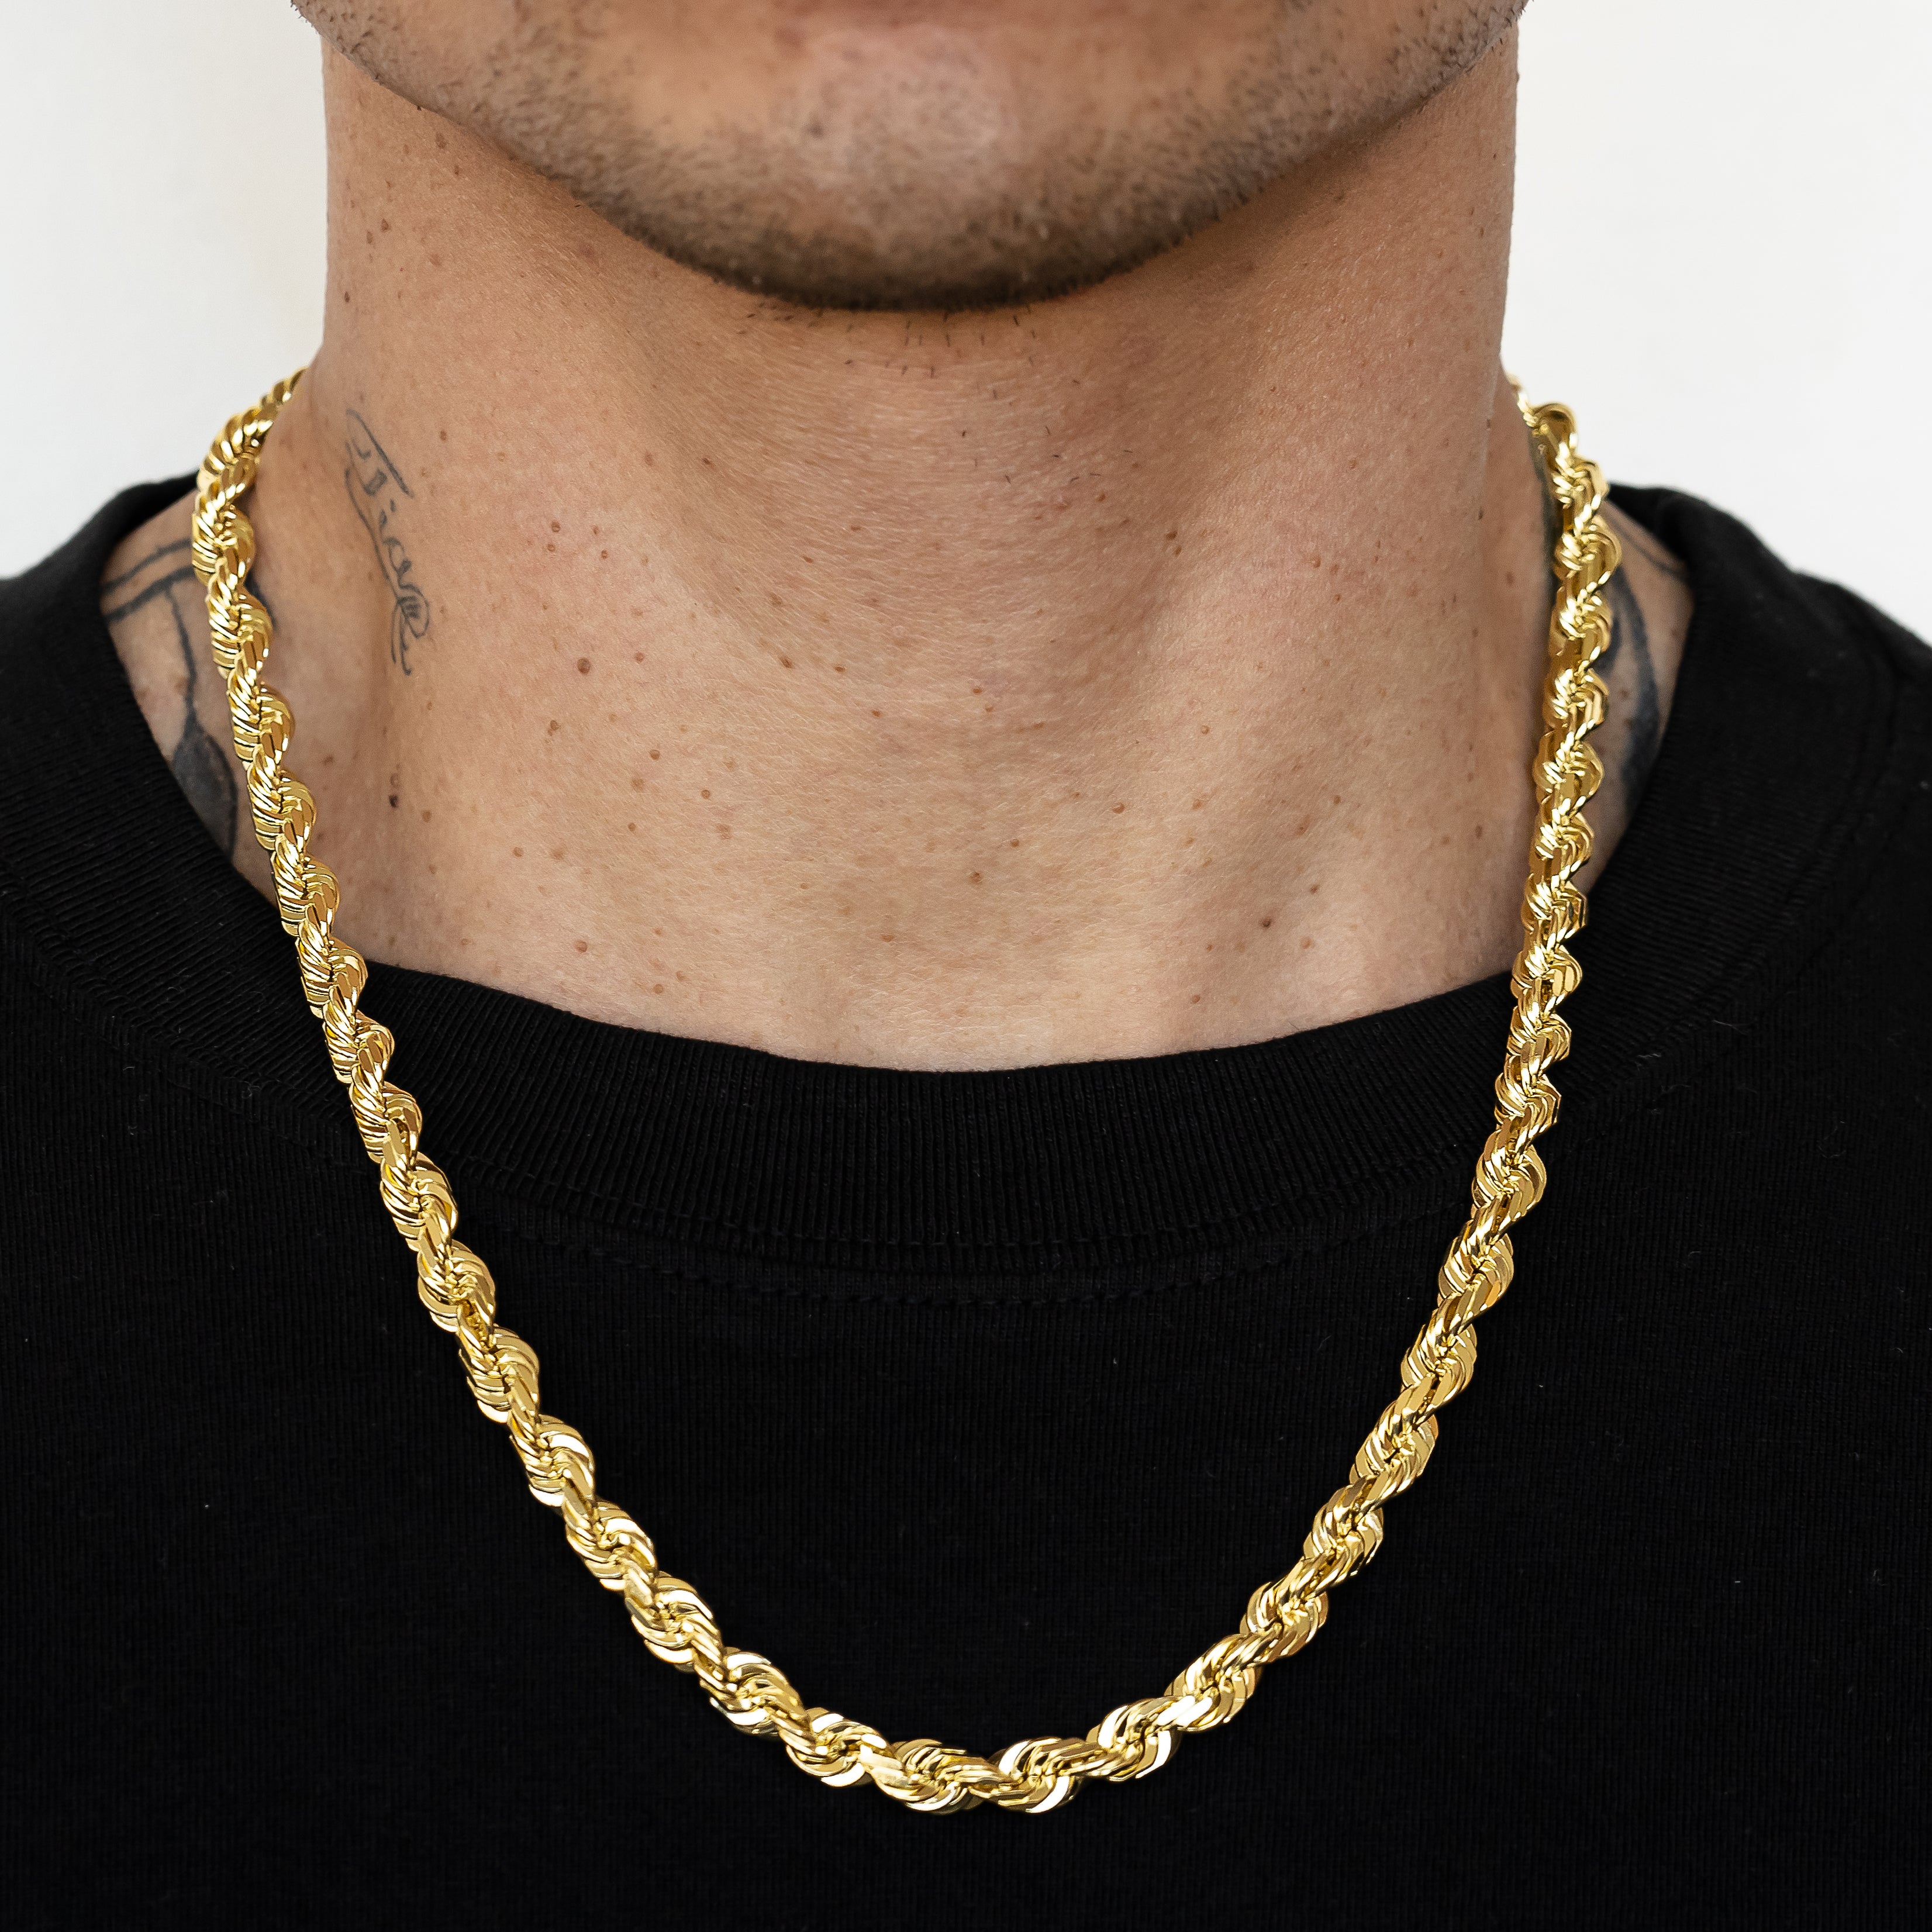 Hollow vs Solid Gold Rope Chain Mens: Which to Choose?